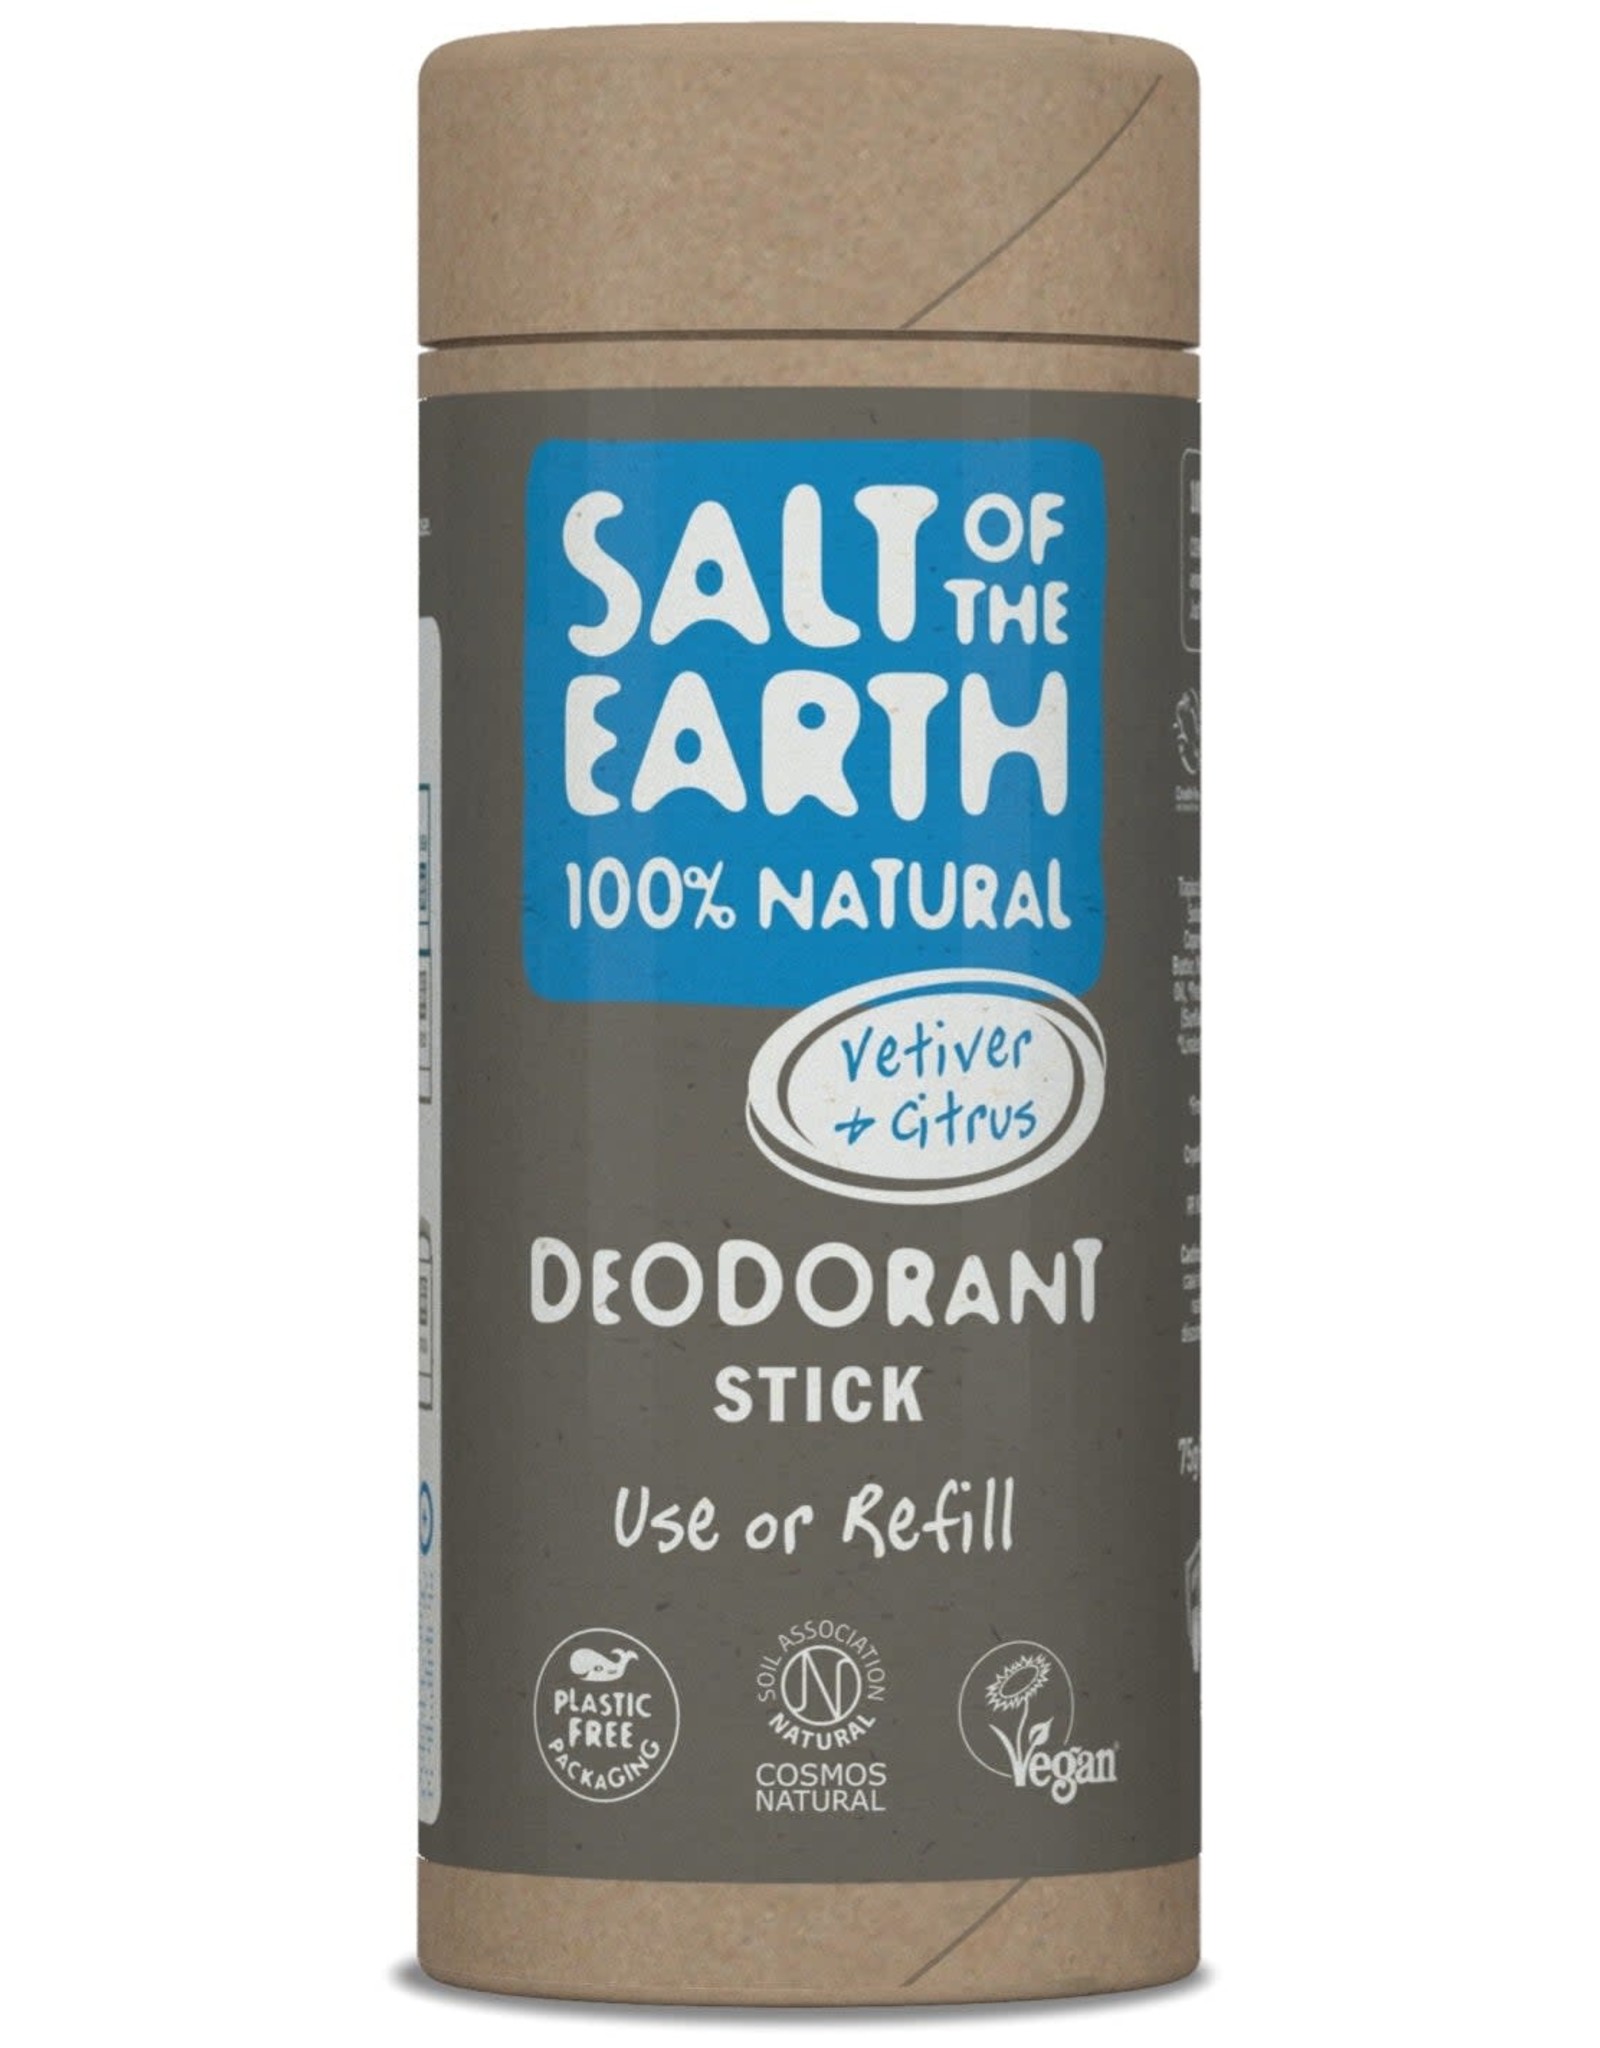 Salt of the Earth Salt of the Earth - Vetiver & Citrus Deodorant Stick - Use or Refill 75g